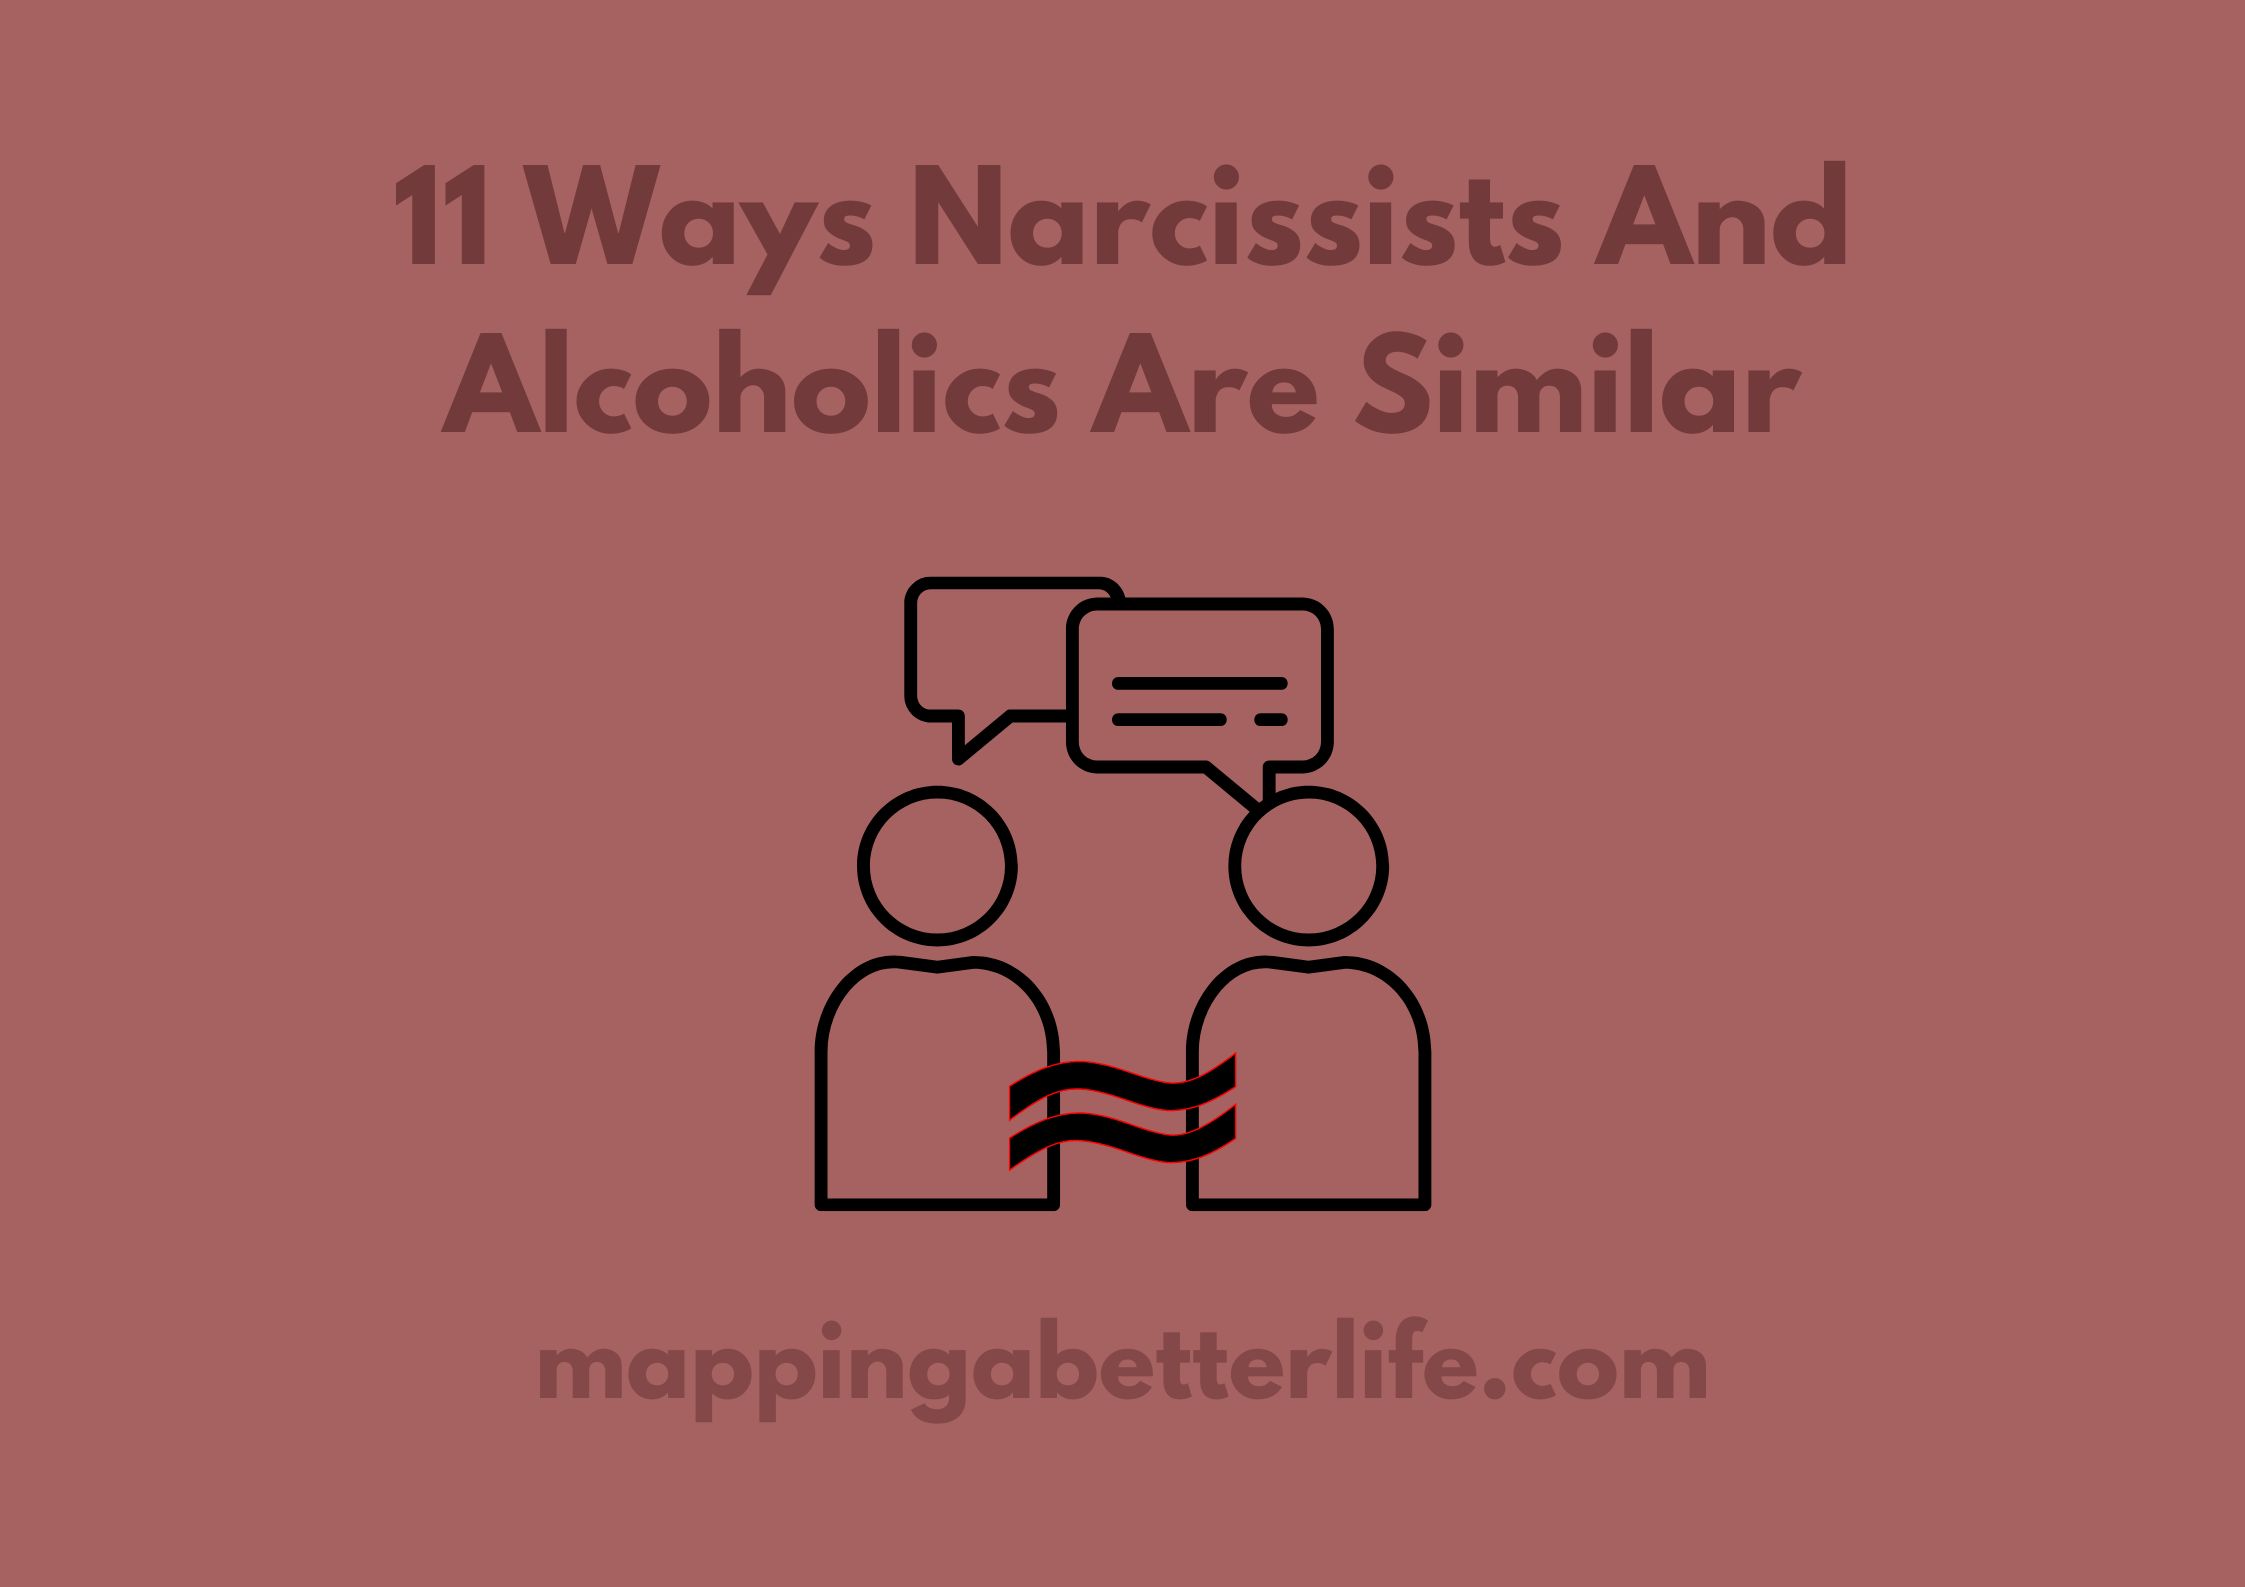 11 Ways Narcissists And Alcoholics Are Similar